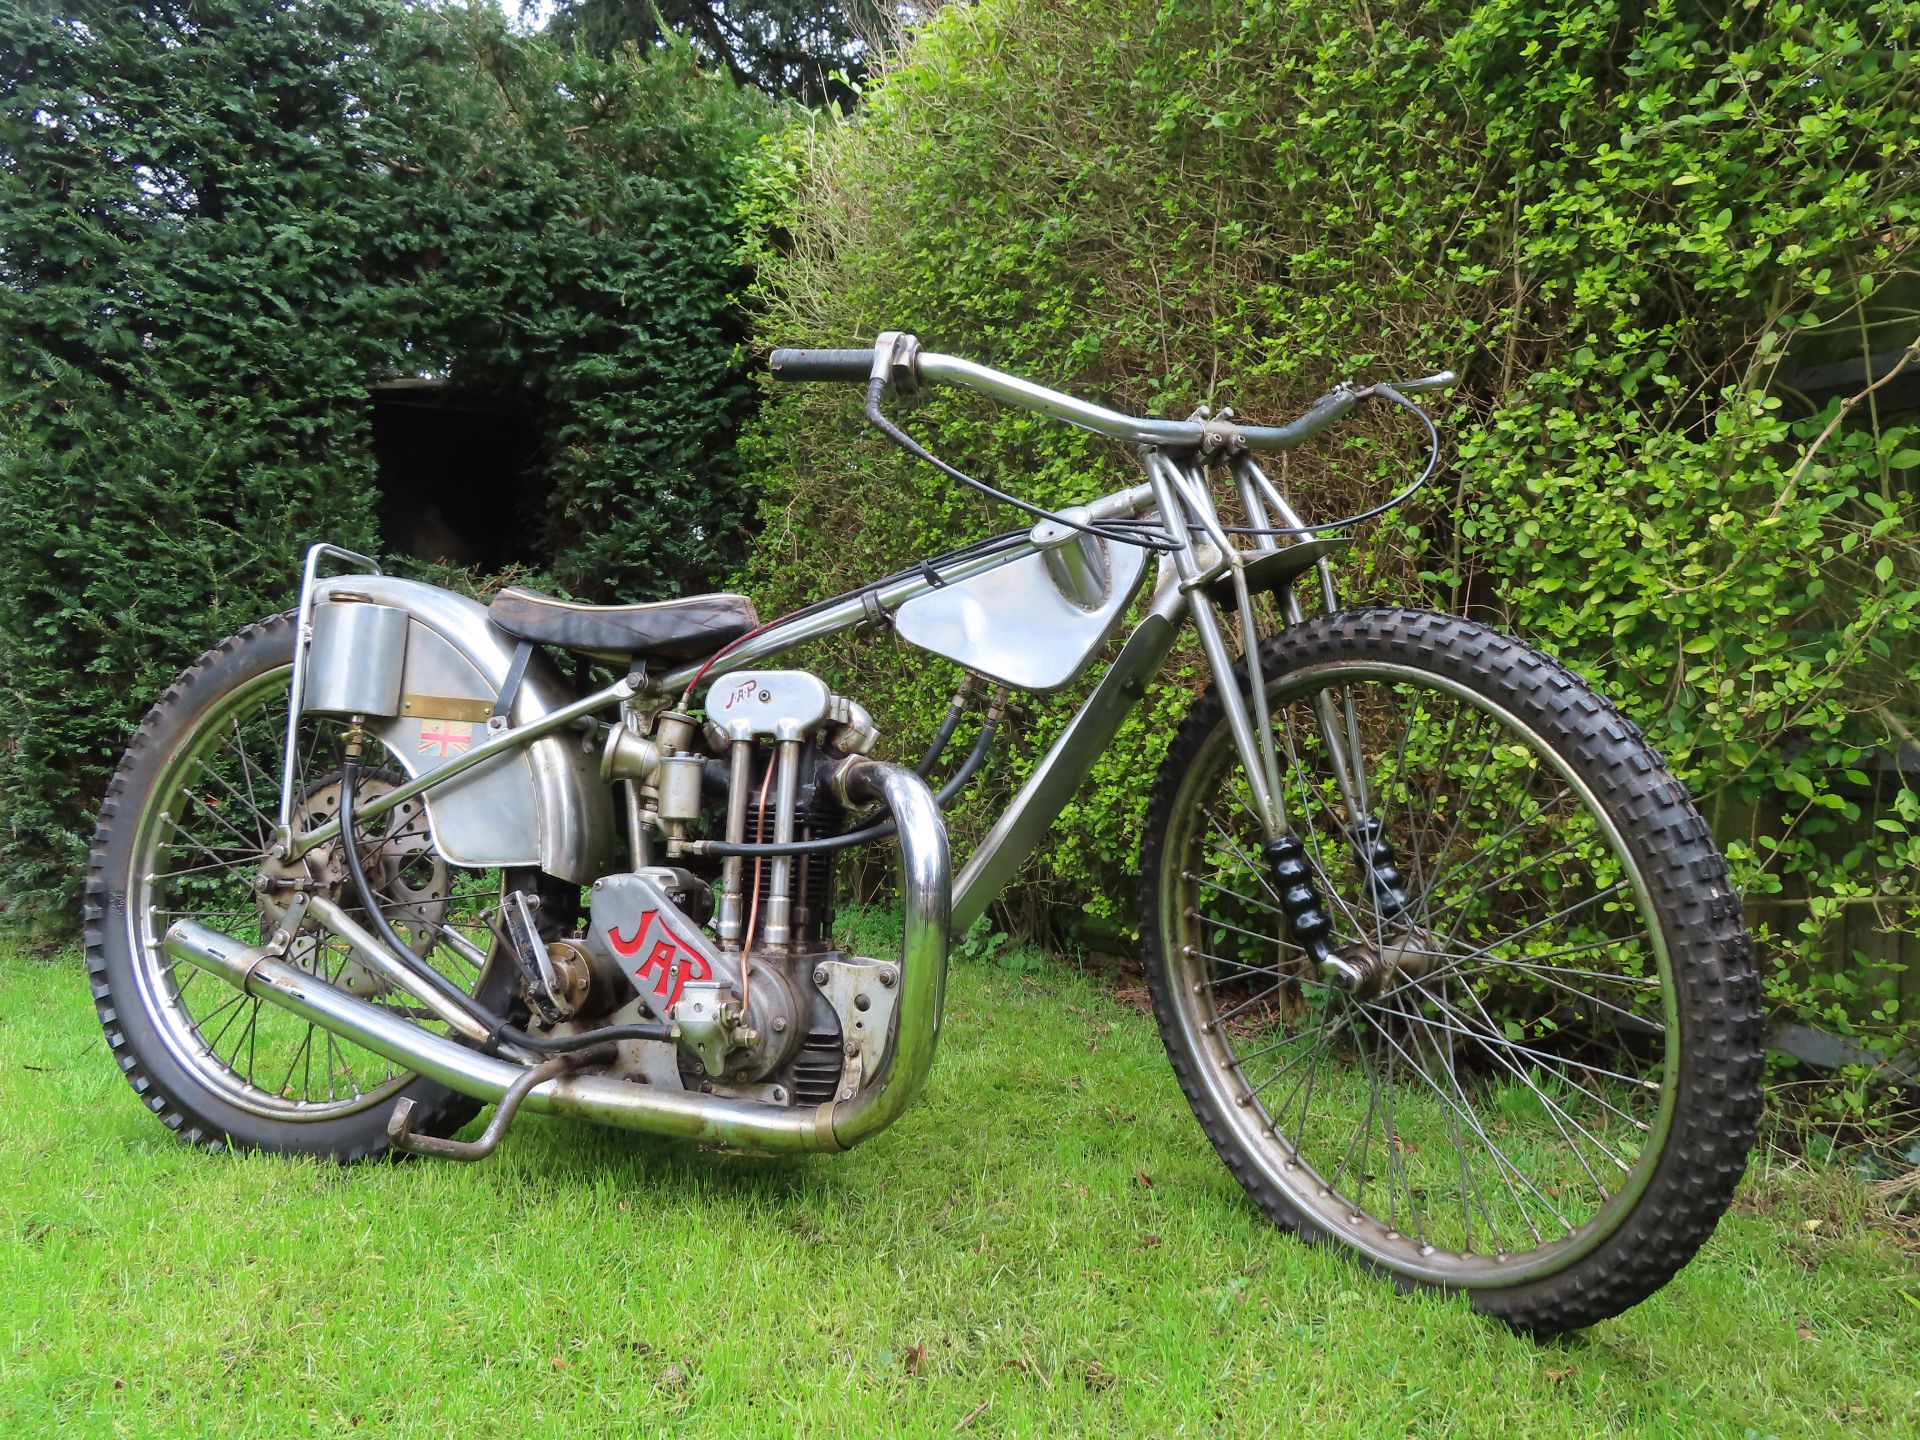 JAP Speedway Racing Motorcycle Frame no. none Engine no. indecipherable (see text)